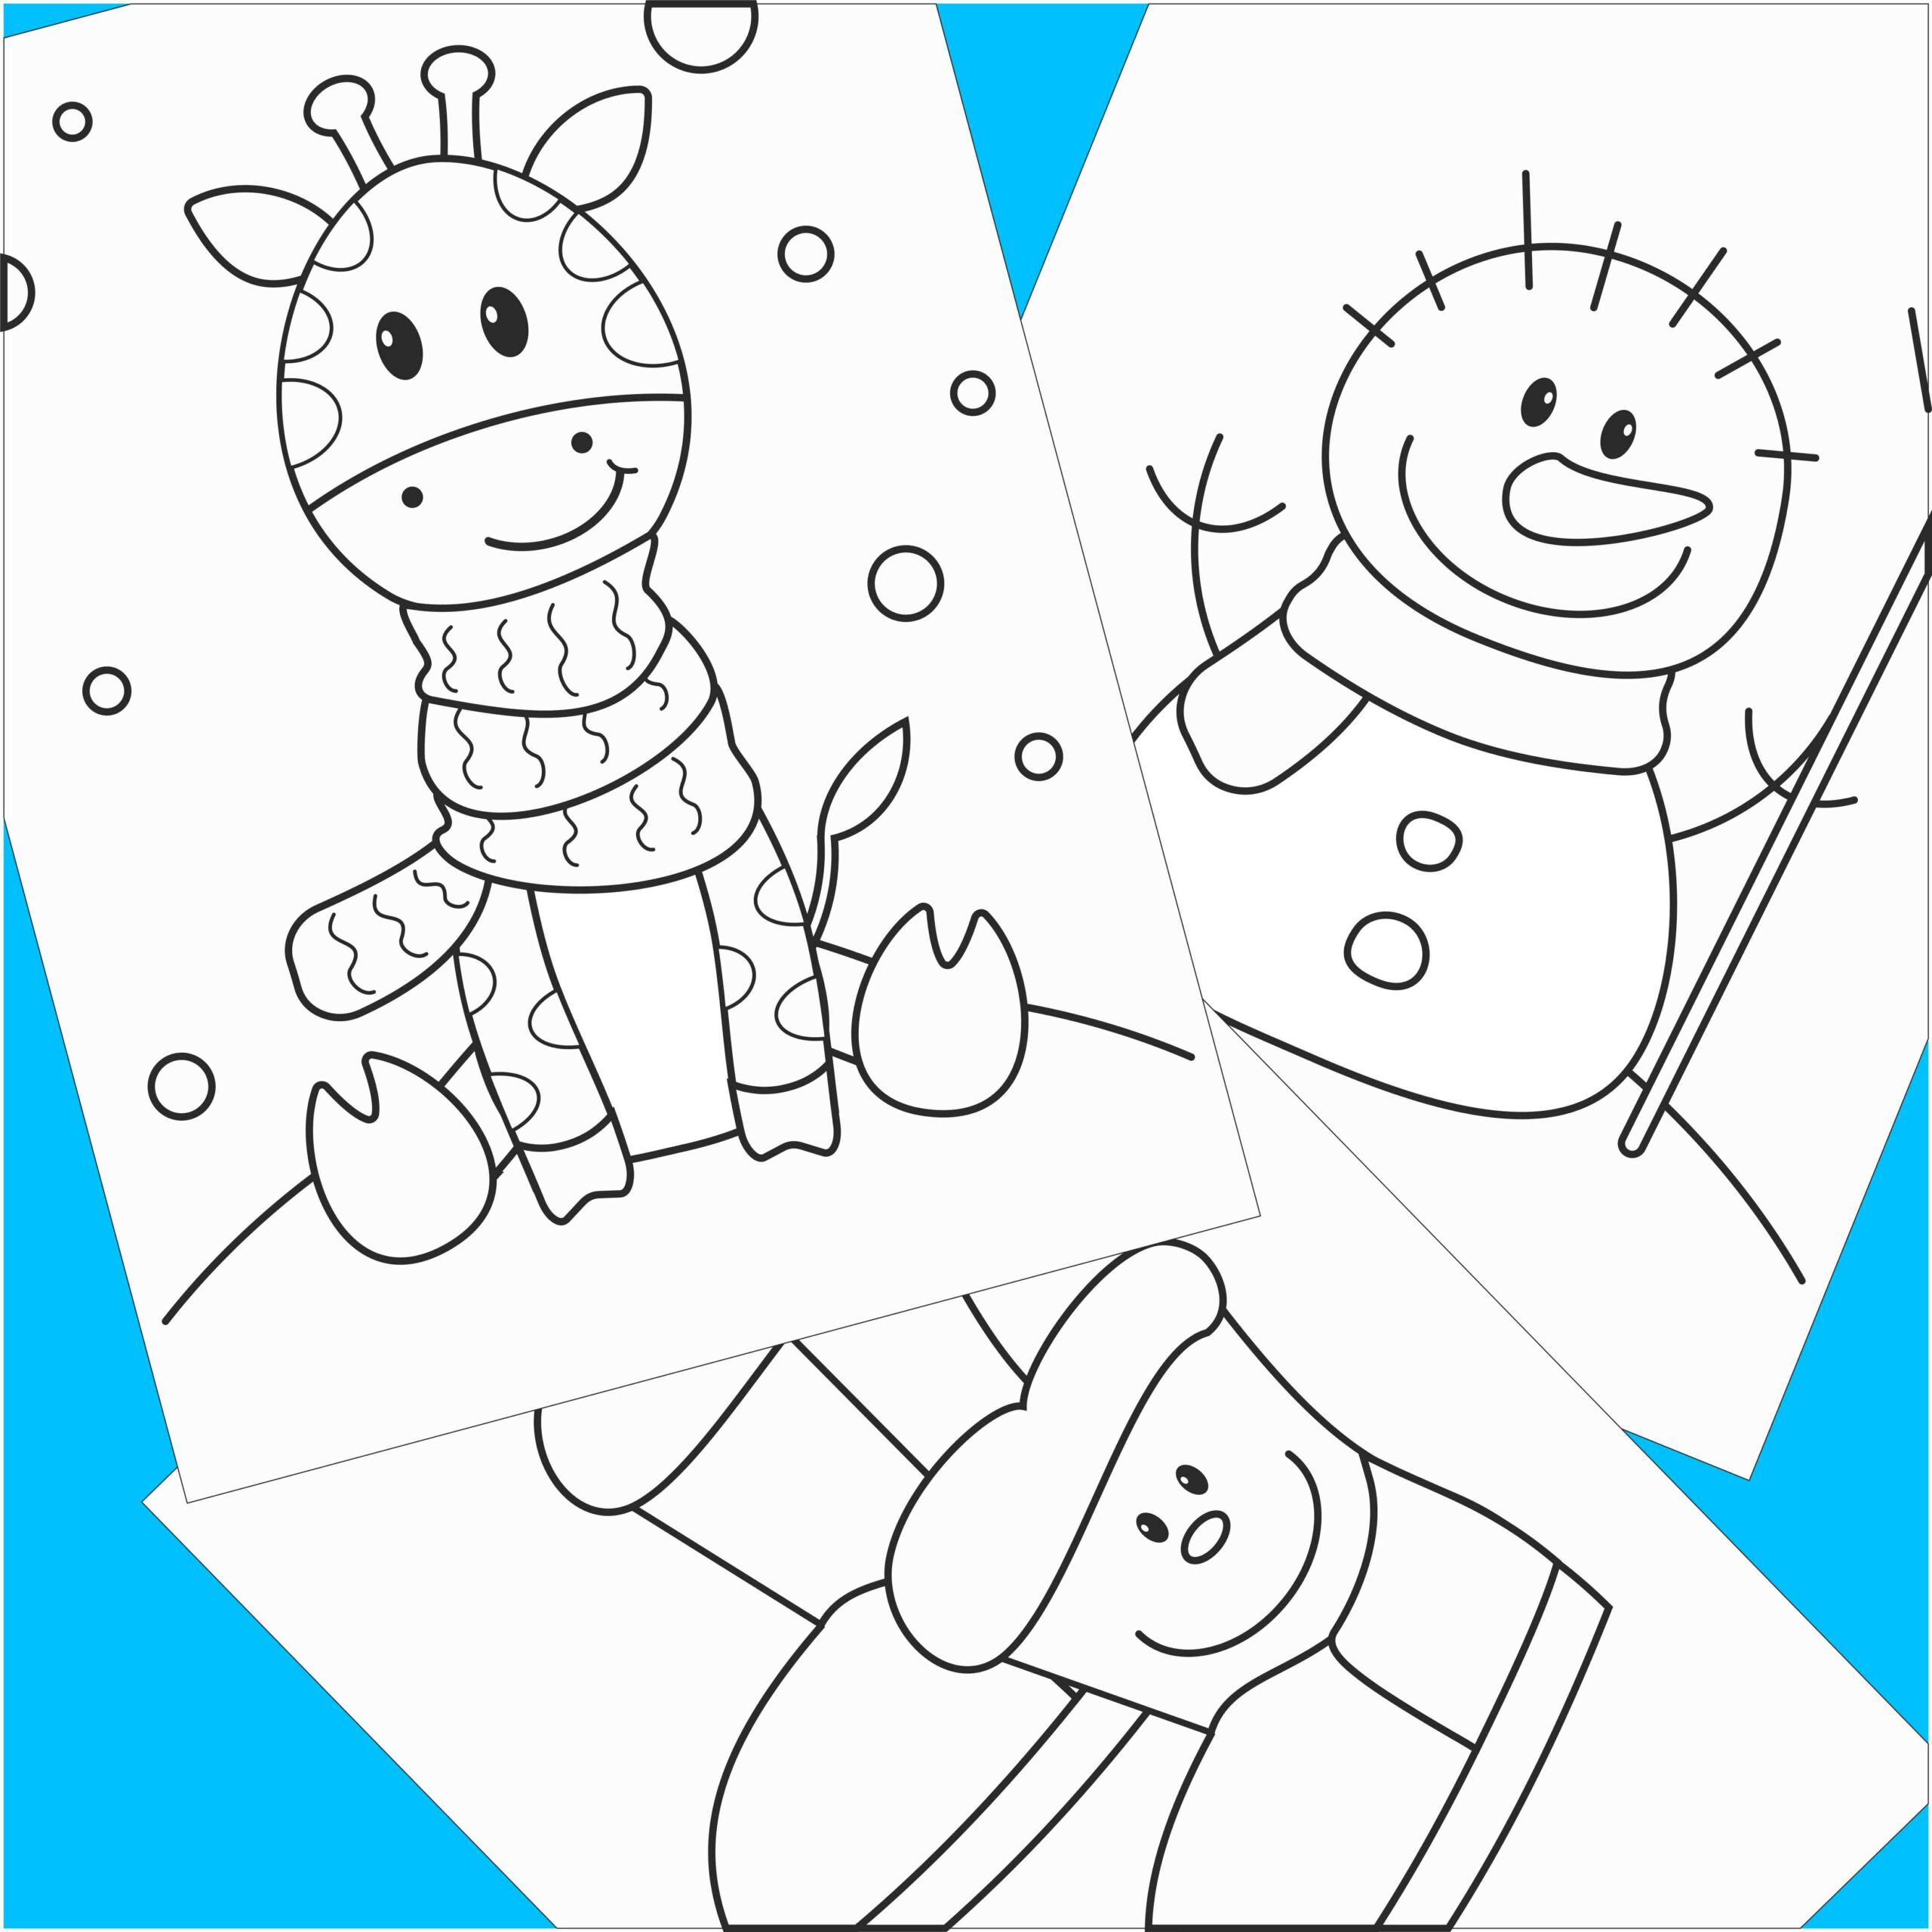 Winter coloring pages kids winter coloring pages winter coloring sheets made by teachers